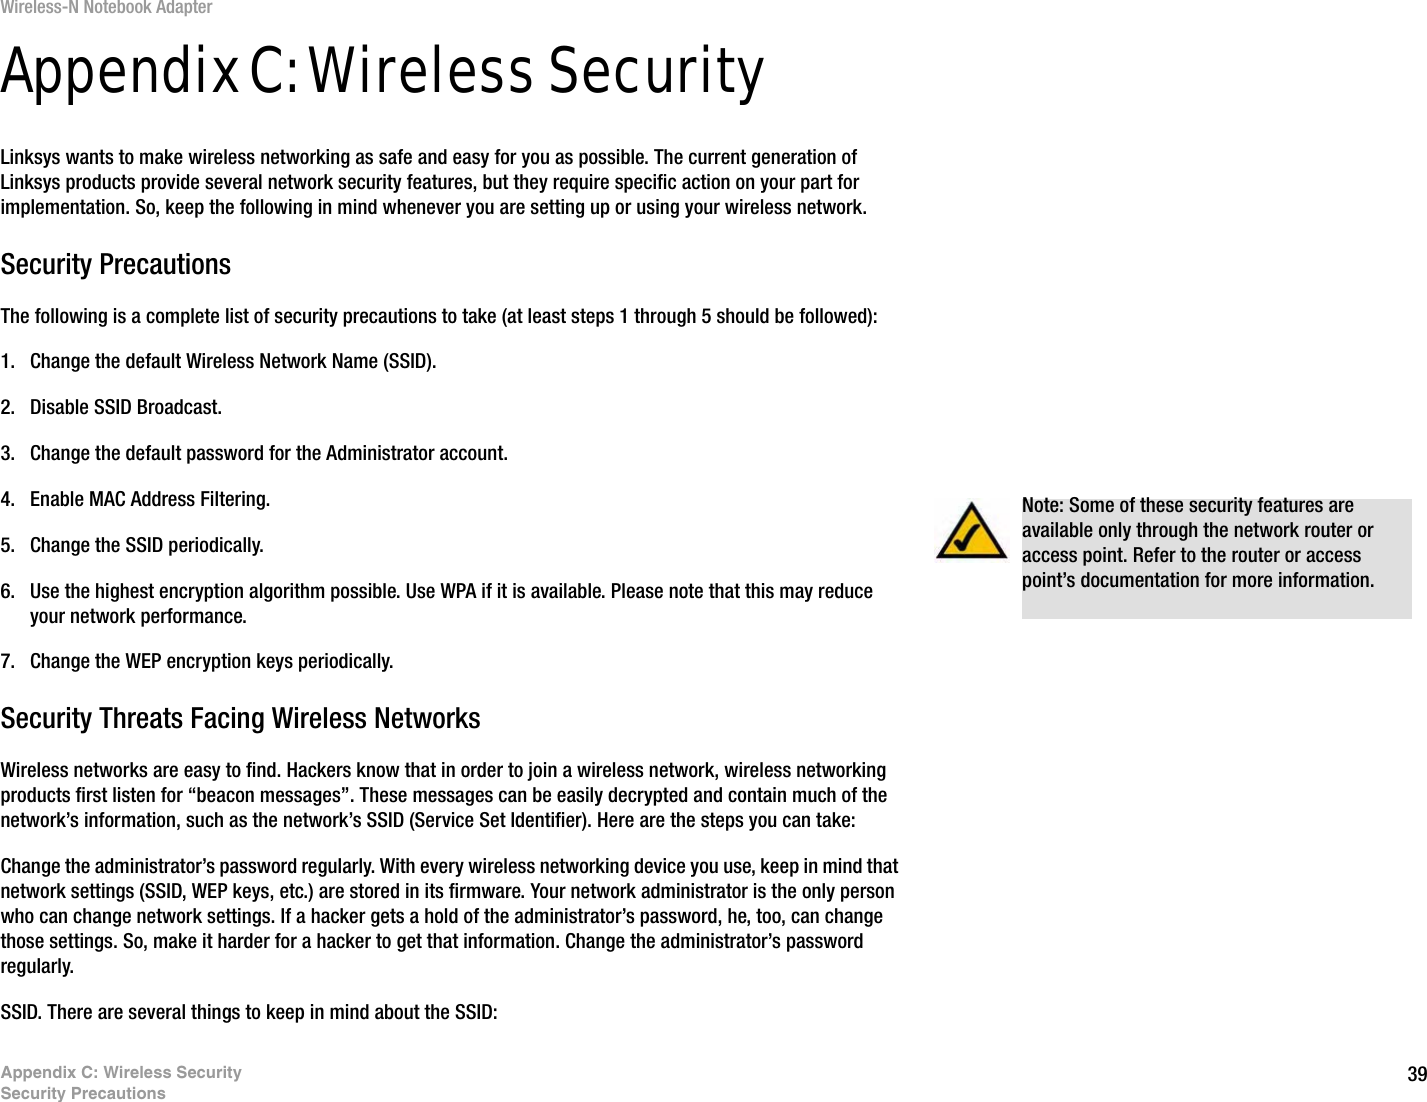 39Appendix C: Wireless SecuritySecurity PrecautionsWireless-N Notebook AdapterAppendix C: Wireless SecurityLinksys wants to make wireless networking as safe and easy for you as possible. The current generation of Linksys products provide several network security features, but they require specific action on your part for implementation. So, keep the following in mind whenever you are setting up or using your wireless network.Security PrecautionsThe following is a complete list of security precautions to take (at least steps 1 through 5 should be followed):1. Change the default Wireless Network Name (SSID). 2. Disable SSID Broadcast. 3. Change the default password for the Administrator account. 4. Enable MAC Address Filtering. 5. Change the SSID periodically. 6. Use the highest encryption algorithm possible. Use WPA if it is available. Please note that this may reduce your network performance. 7. Change the WEP encryption keys periodically. Security Threats Facing Wireless Networks Wireless networks are easy to find. Hackers know that in order to join a wireless network, wireless networking products first listen for “beacon messages”. These messages can be easily decrypted and contain much of the network’s information, such as the network’s SSID (Service Set Identifier). Here are the steps you can take:Change the administrator’s password regularly. With every wireless networking device you use, keep in mind that network settings (SSID, WEP keys, etc.) are stored in its firmware. Your network administrator is the only person who can change network settings. If a hacker gets a hold of the administrator’s password, he, too, can change those settings. So, make it harder for a hacker to get that information. Change the administrator’s password regularly.SSID. There are several things to keep in mind about the SSID: Note: Some of these security features are available only through the network router or access point. Refer to the router or access point’s documentation for more information.